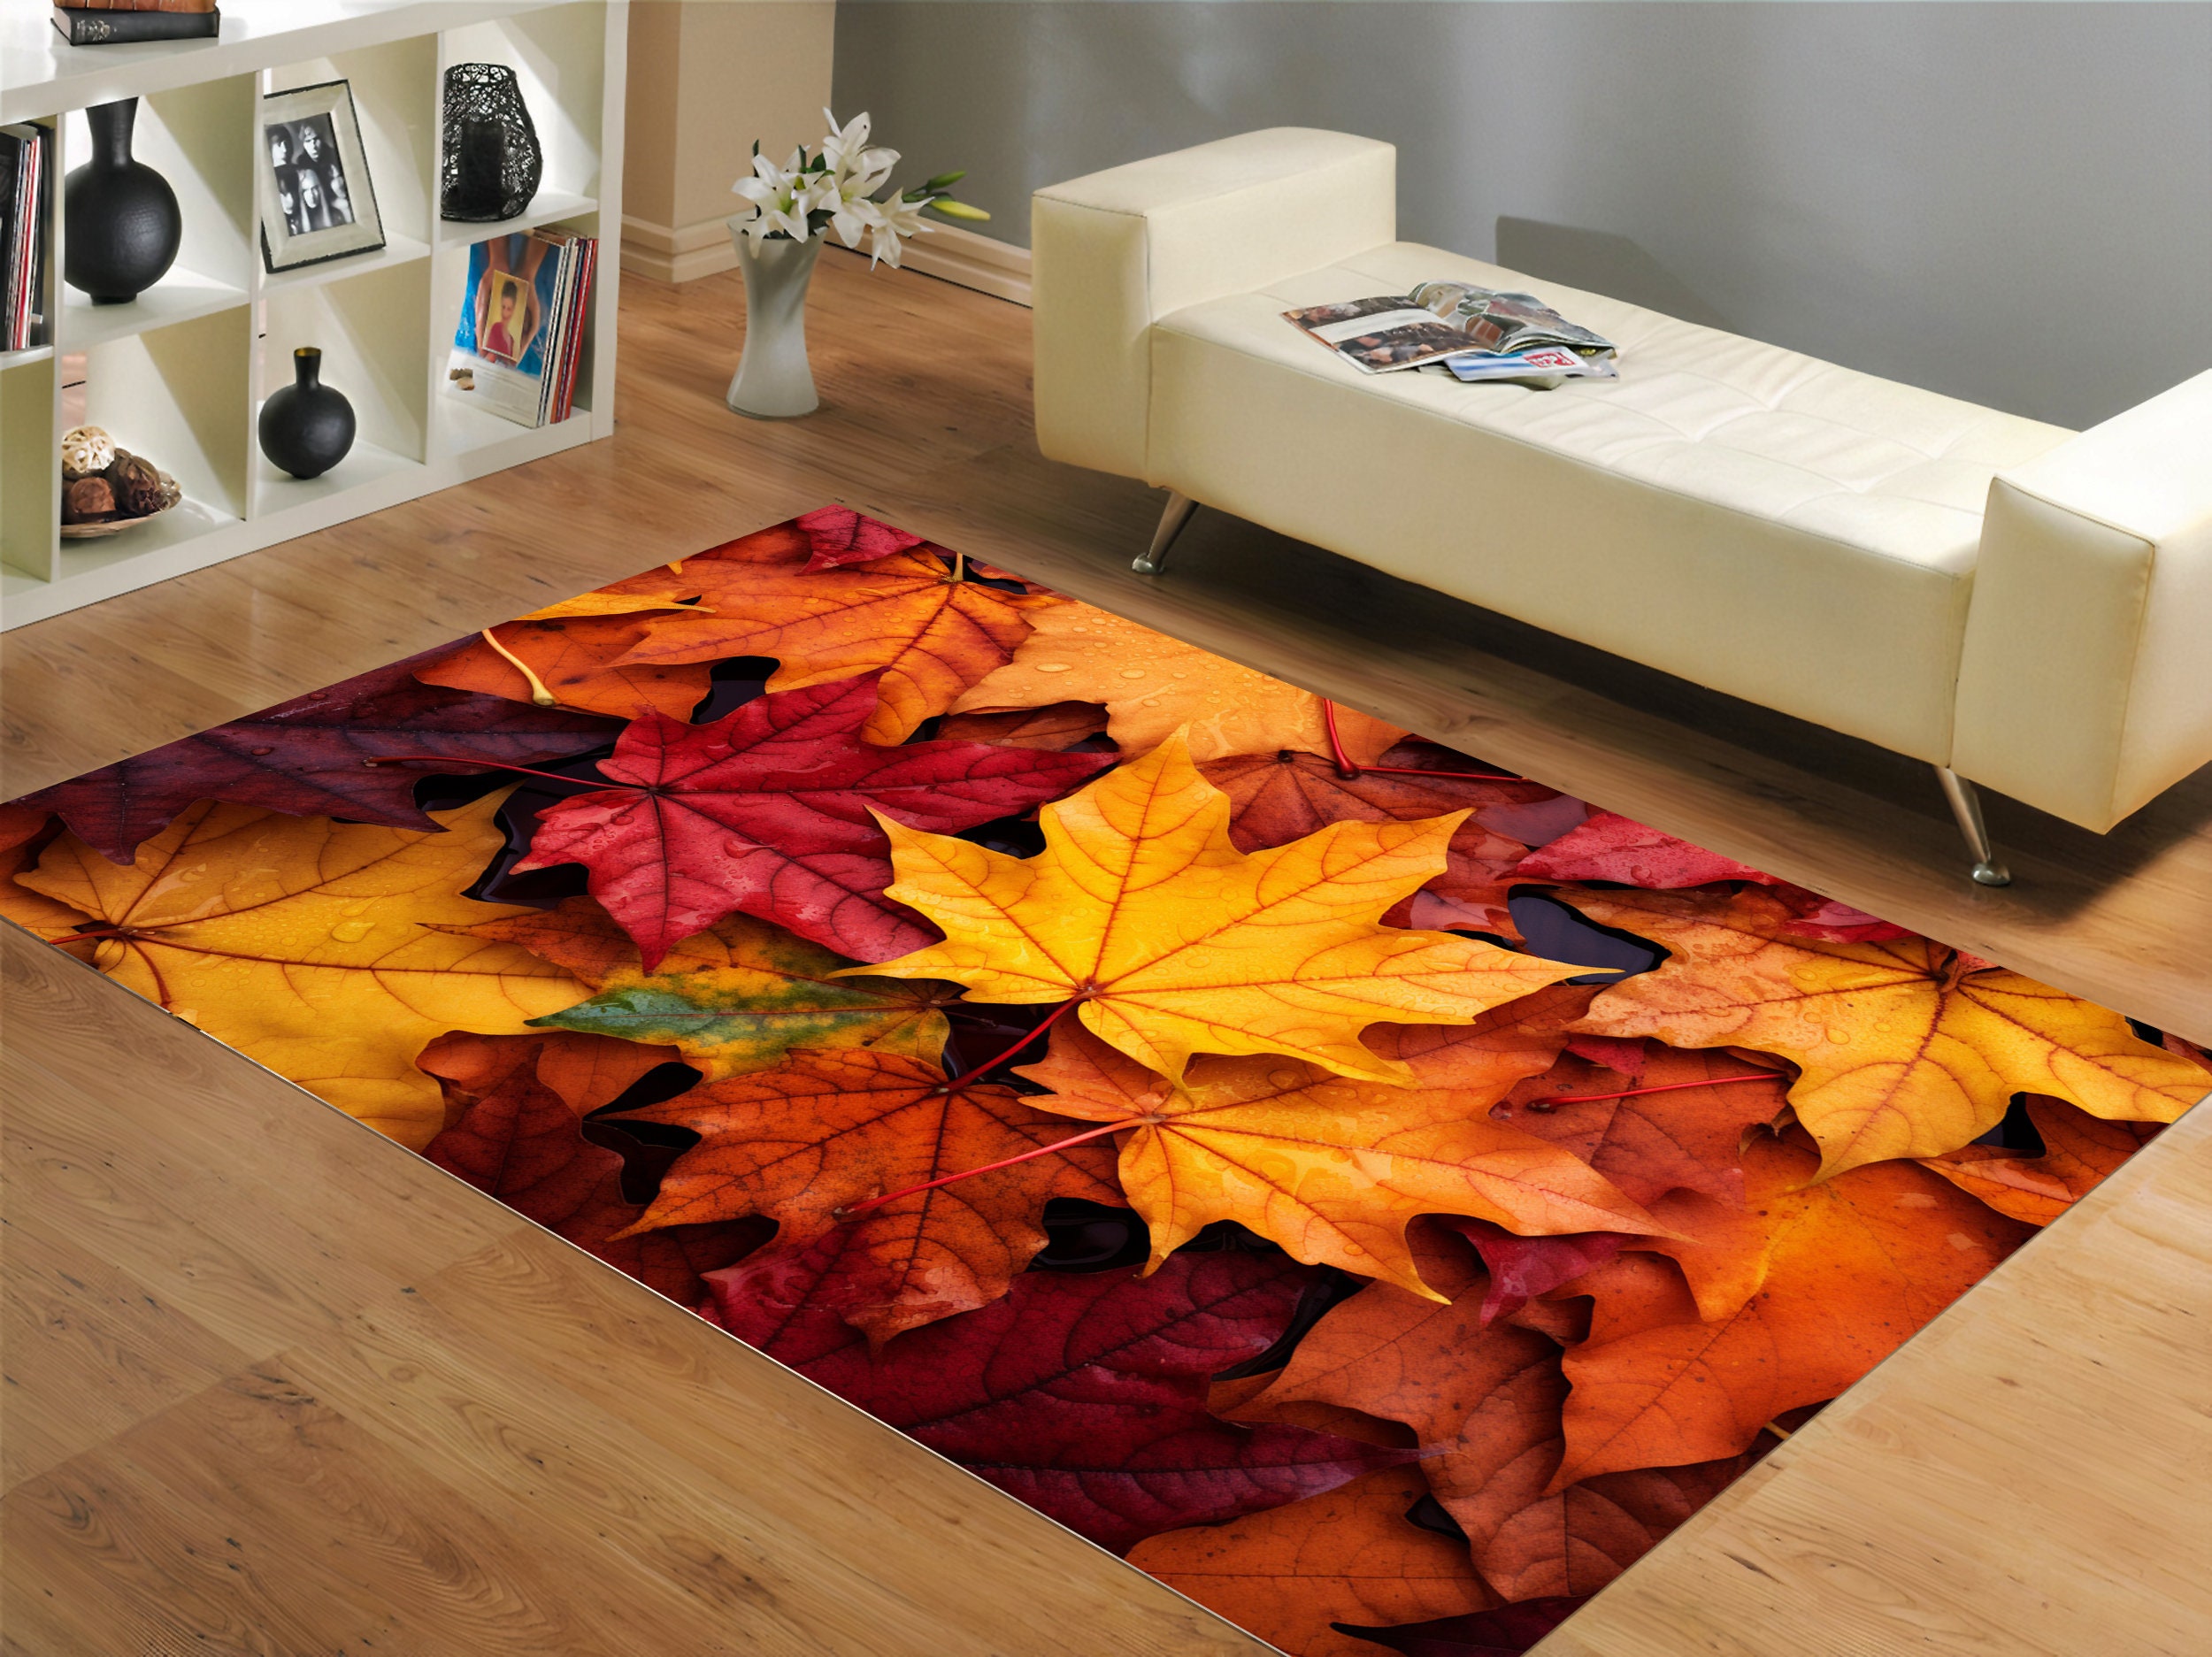  Fall Round Area Rug 4ft White Pumpkin Floor Carpets Indoor Floor  Area Mat Stain-Proof Mat Non-Skid Rugs for Living Room Dining Kitchen  Bedroom Nursery, Harvest Leaves Wheat Wooden Thanksgiving Decor 